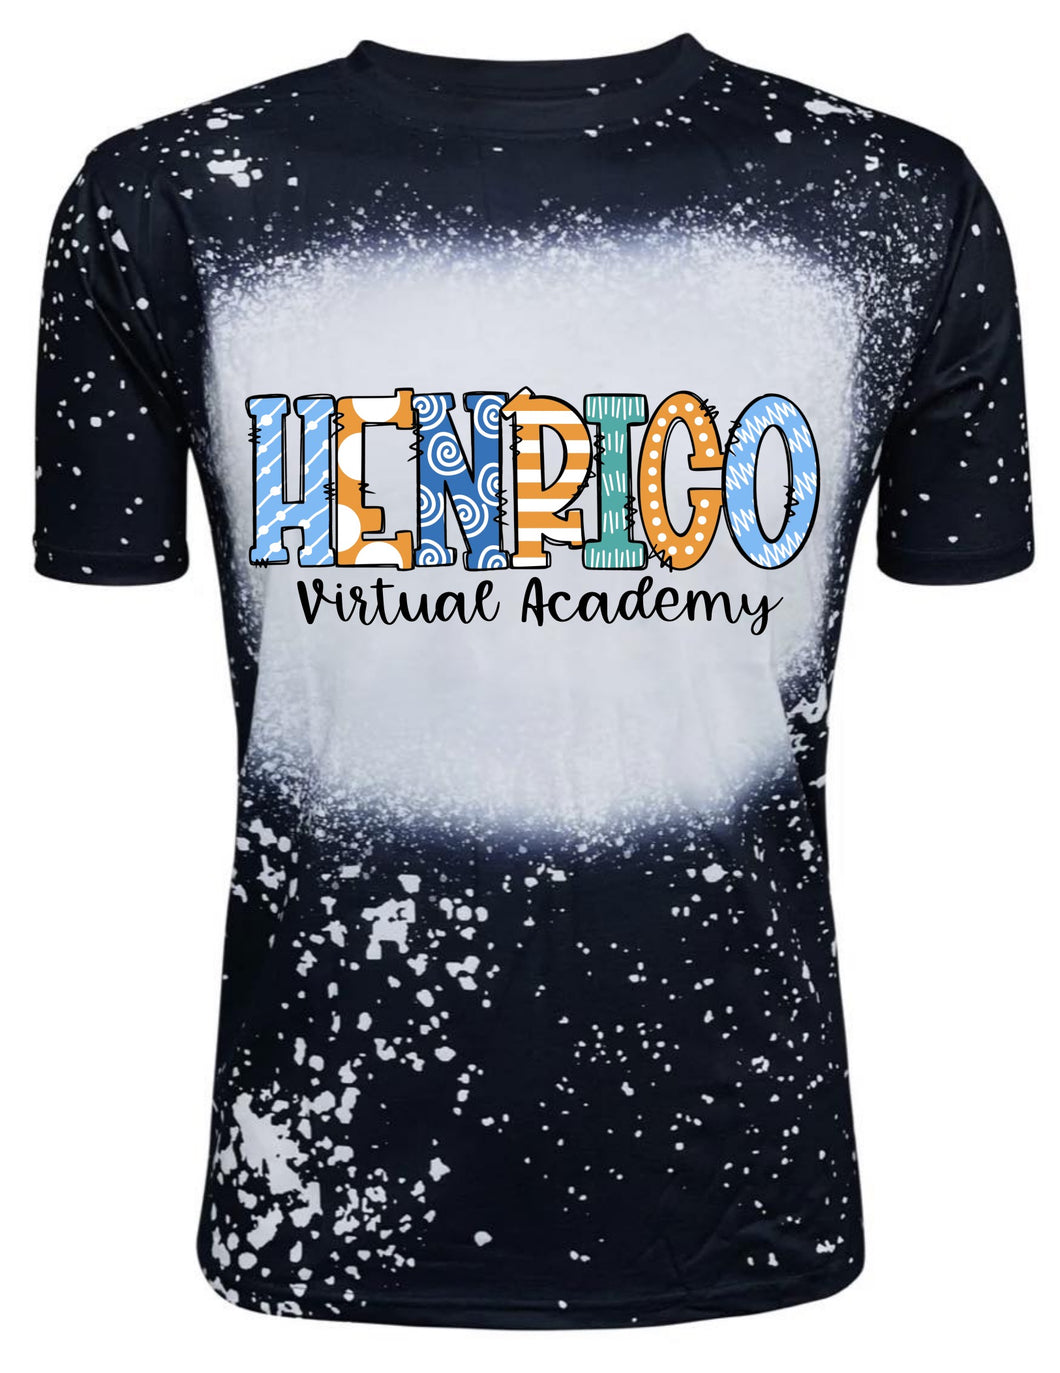 **Limited Edition** Henrico Virtual Academy Bleached Tshirt